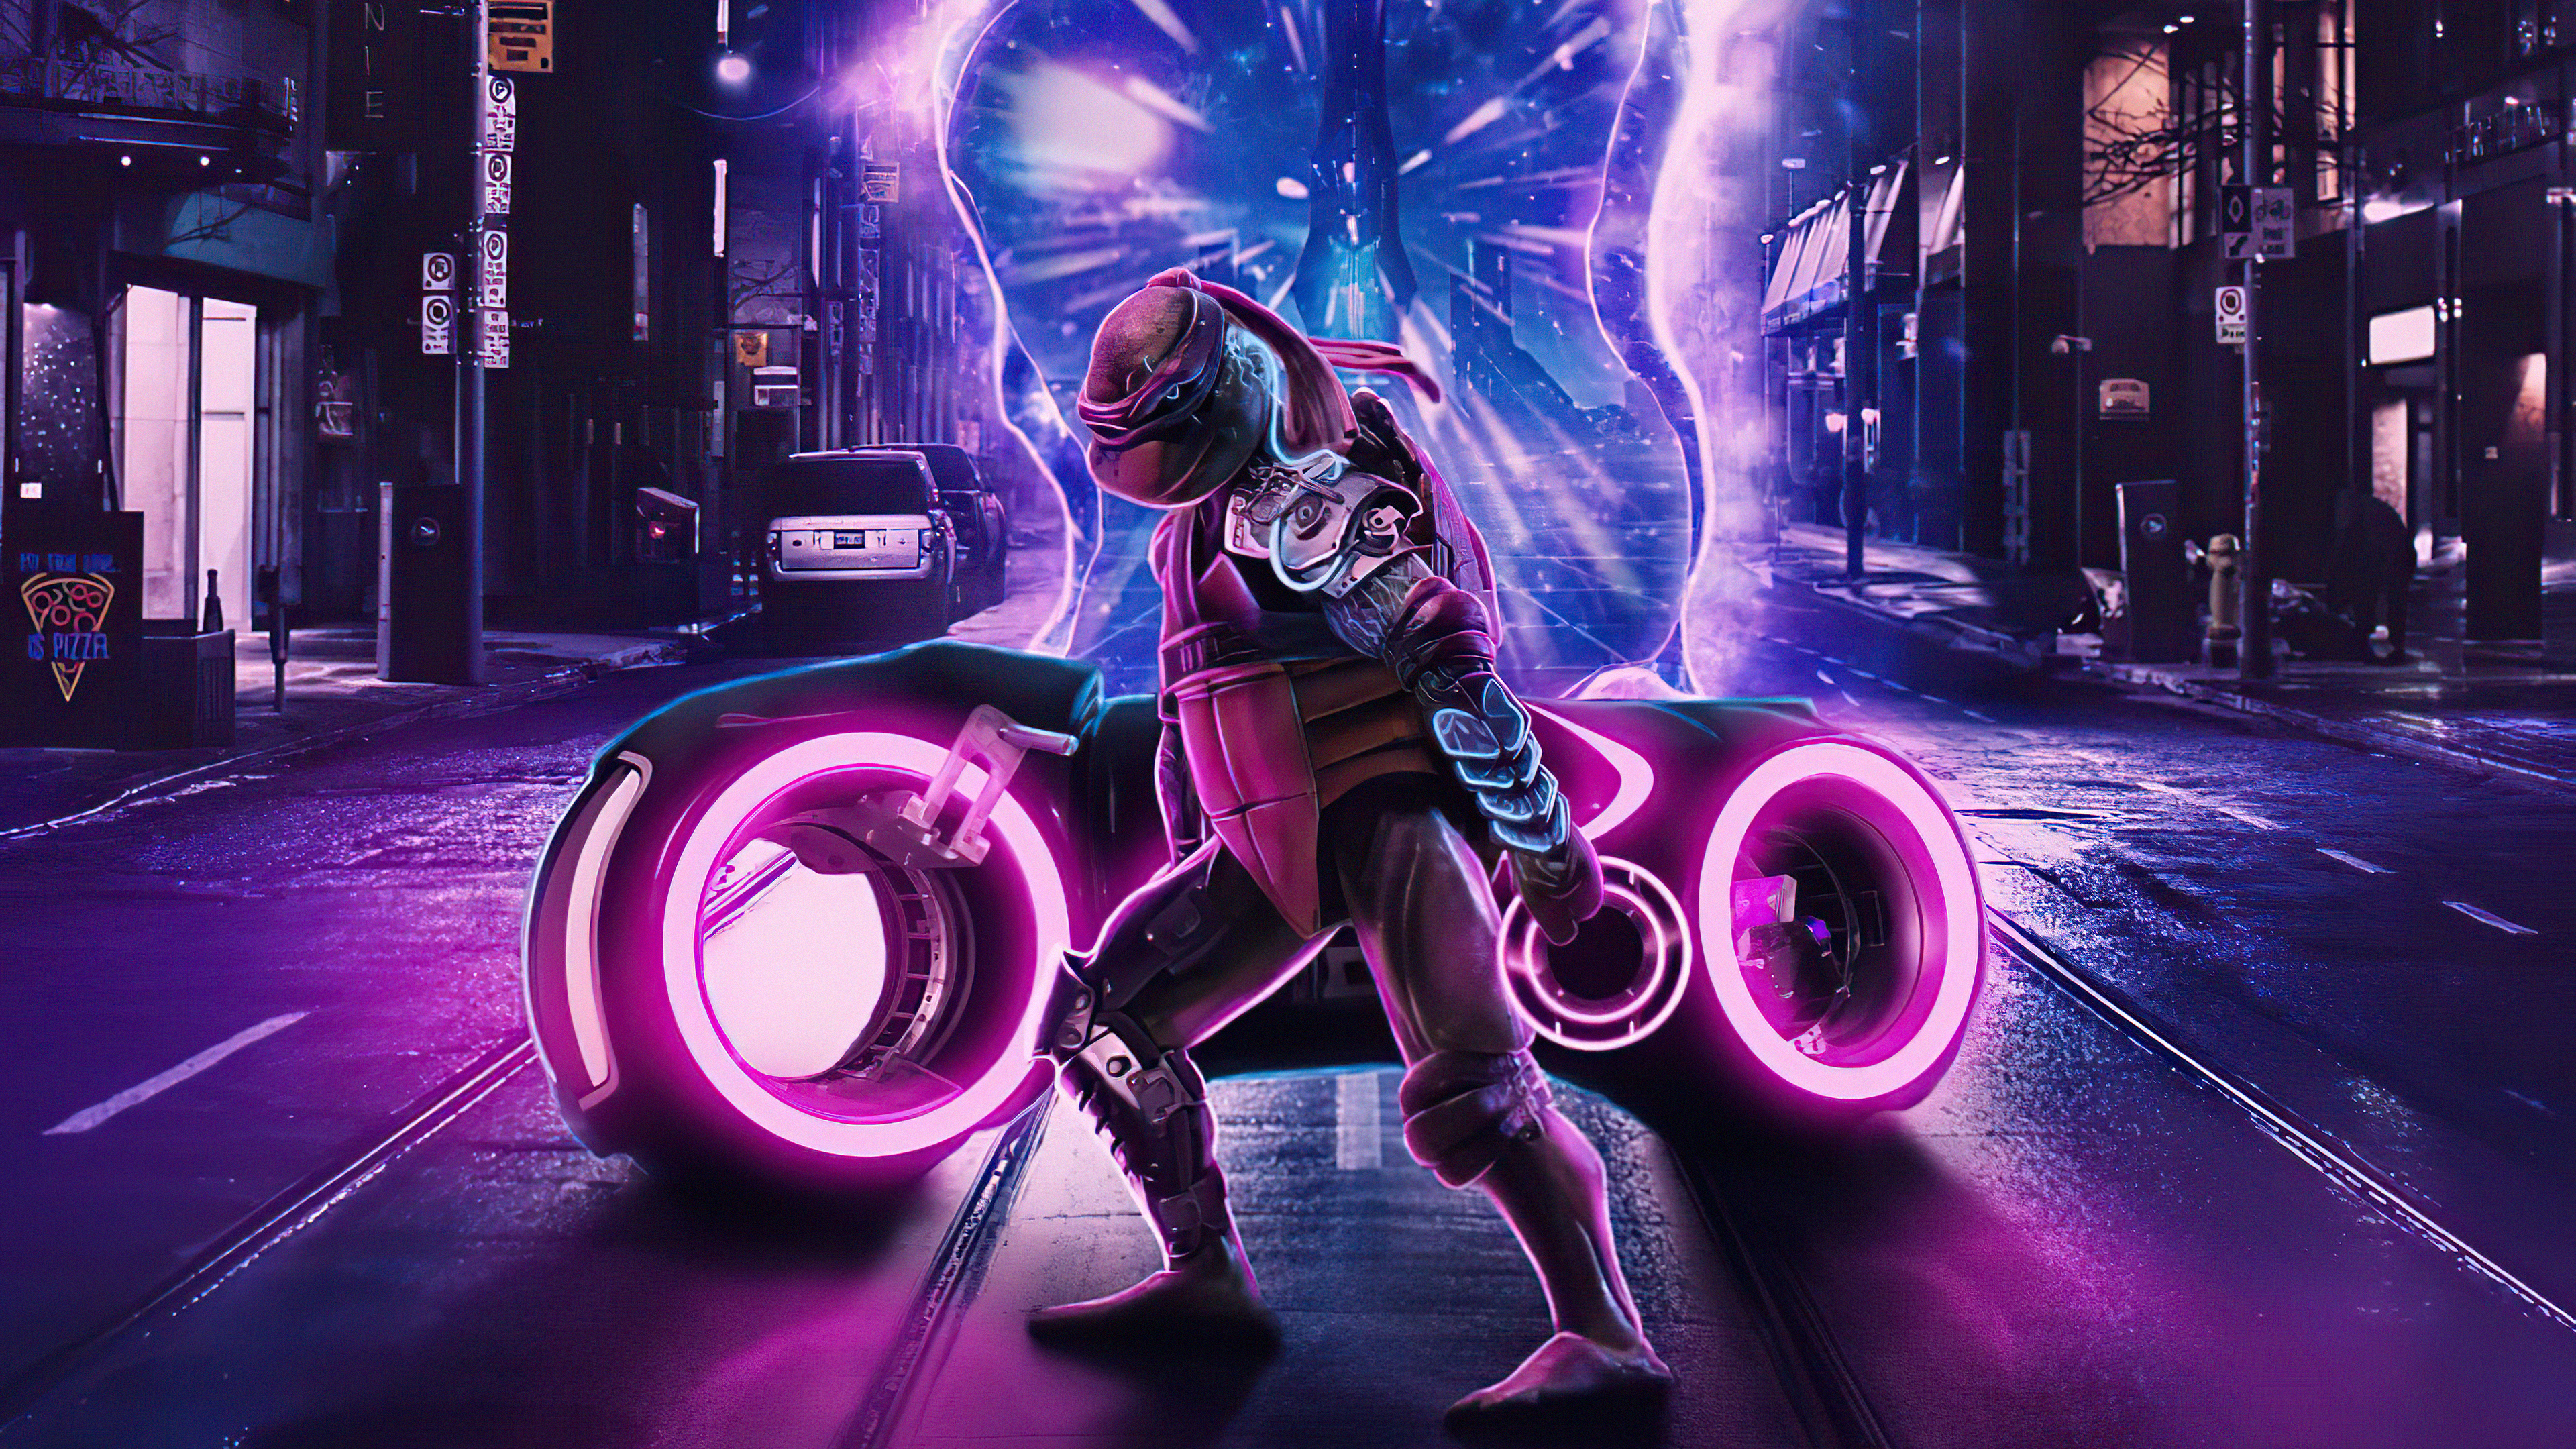 Scifi tmnt tron bike k hd artist k wallpapers images backgrounds photos and pictures